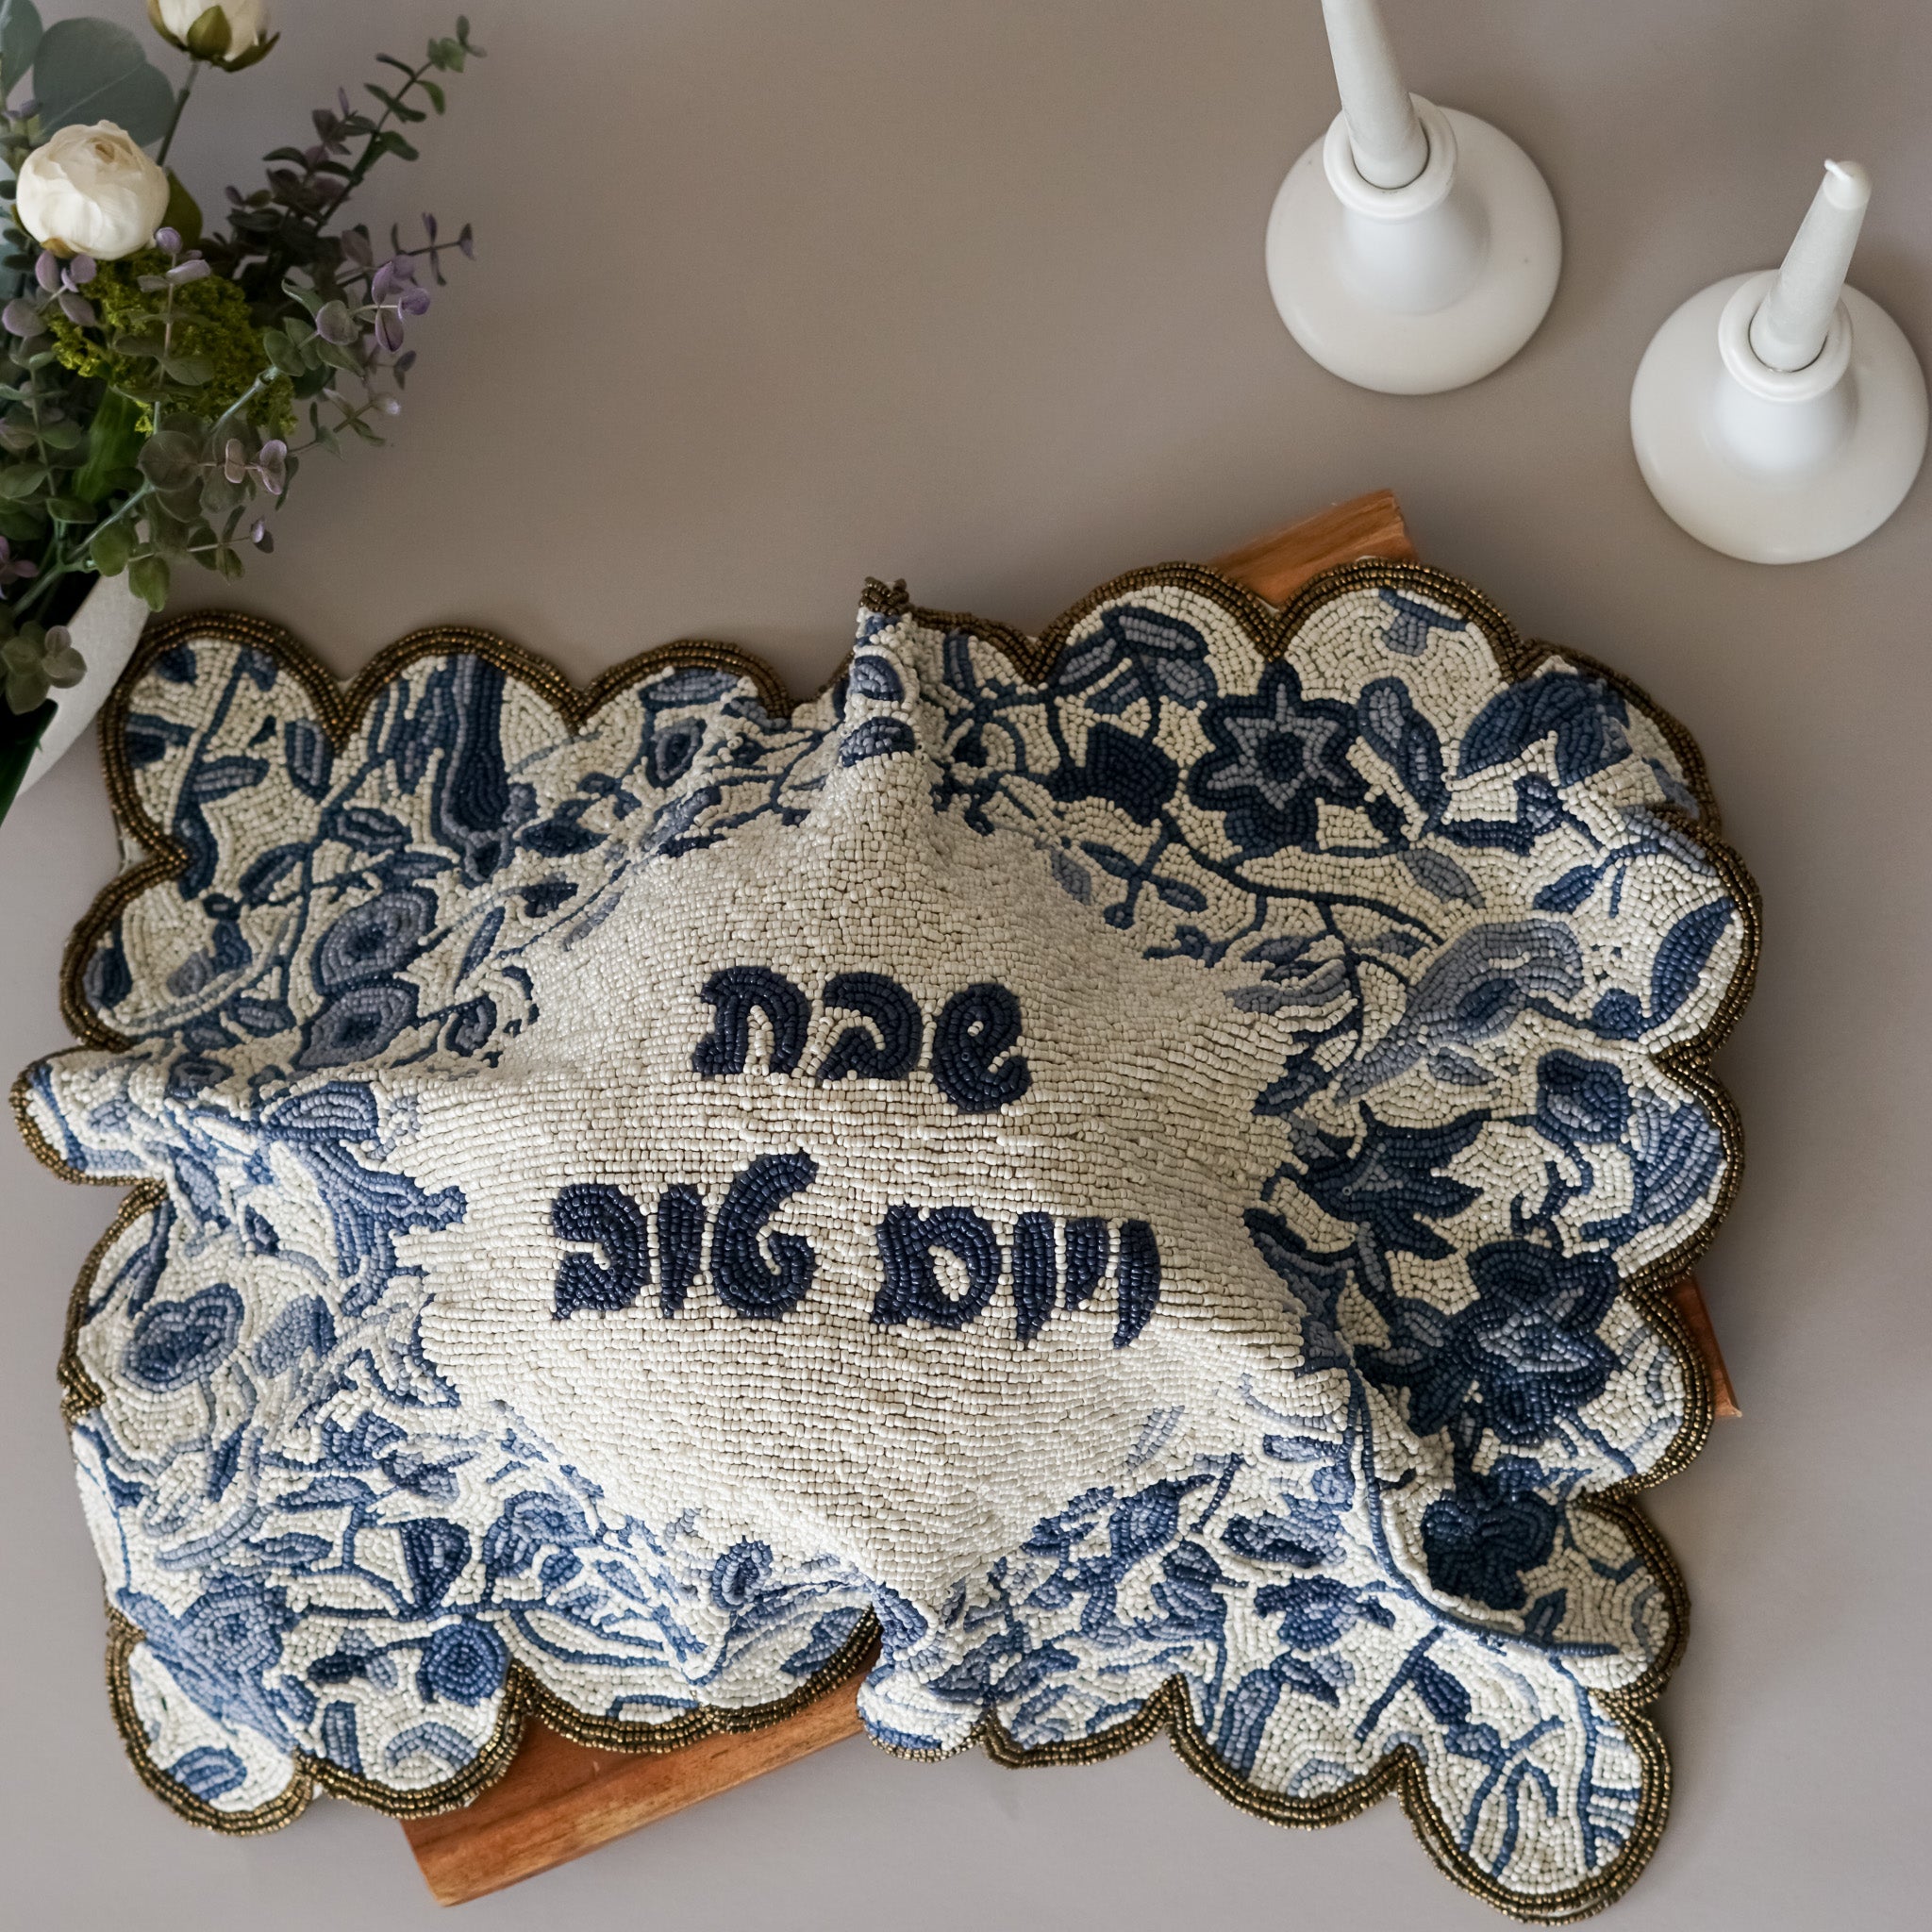 The Toile One | Beaded Challah Cover